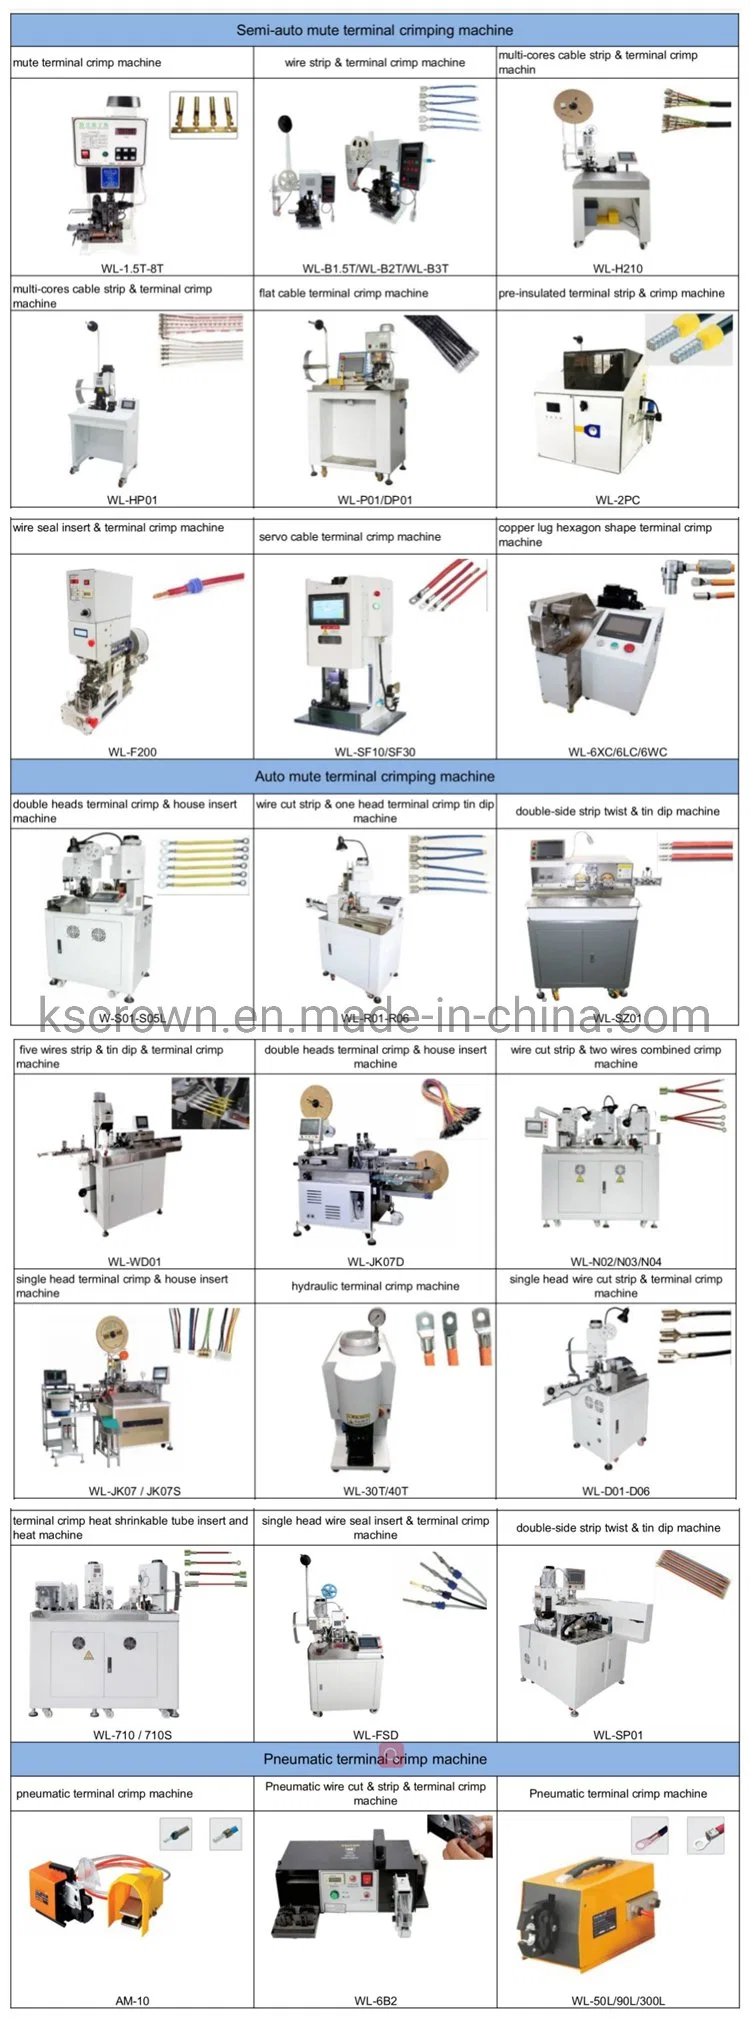 Fully Automatic Wire Cutting Stripping Vibrating Plate Feeding Terminal Crimping Machine